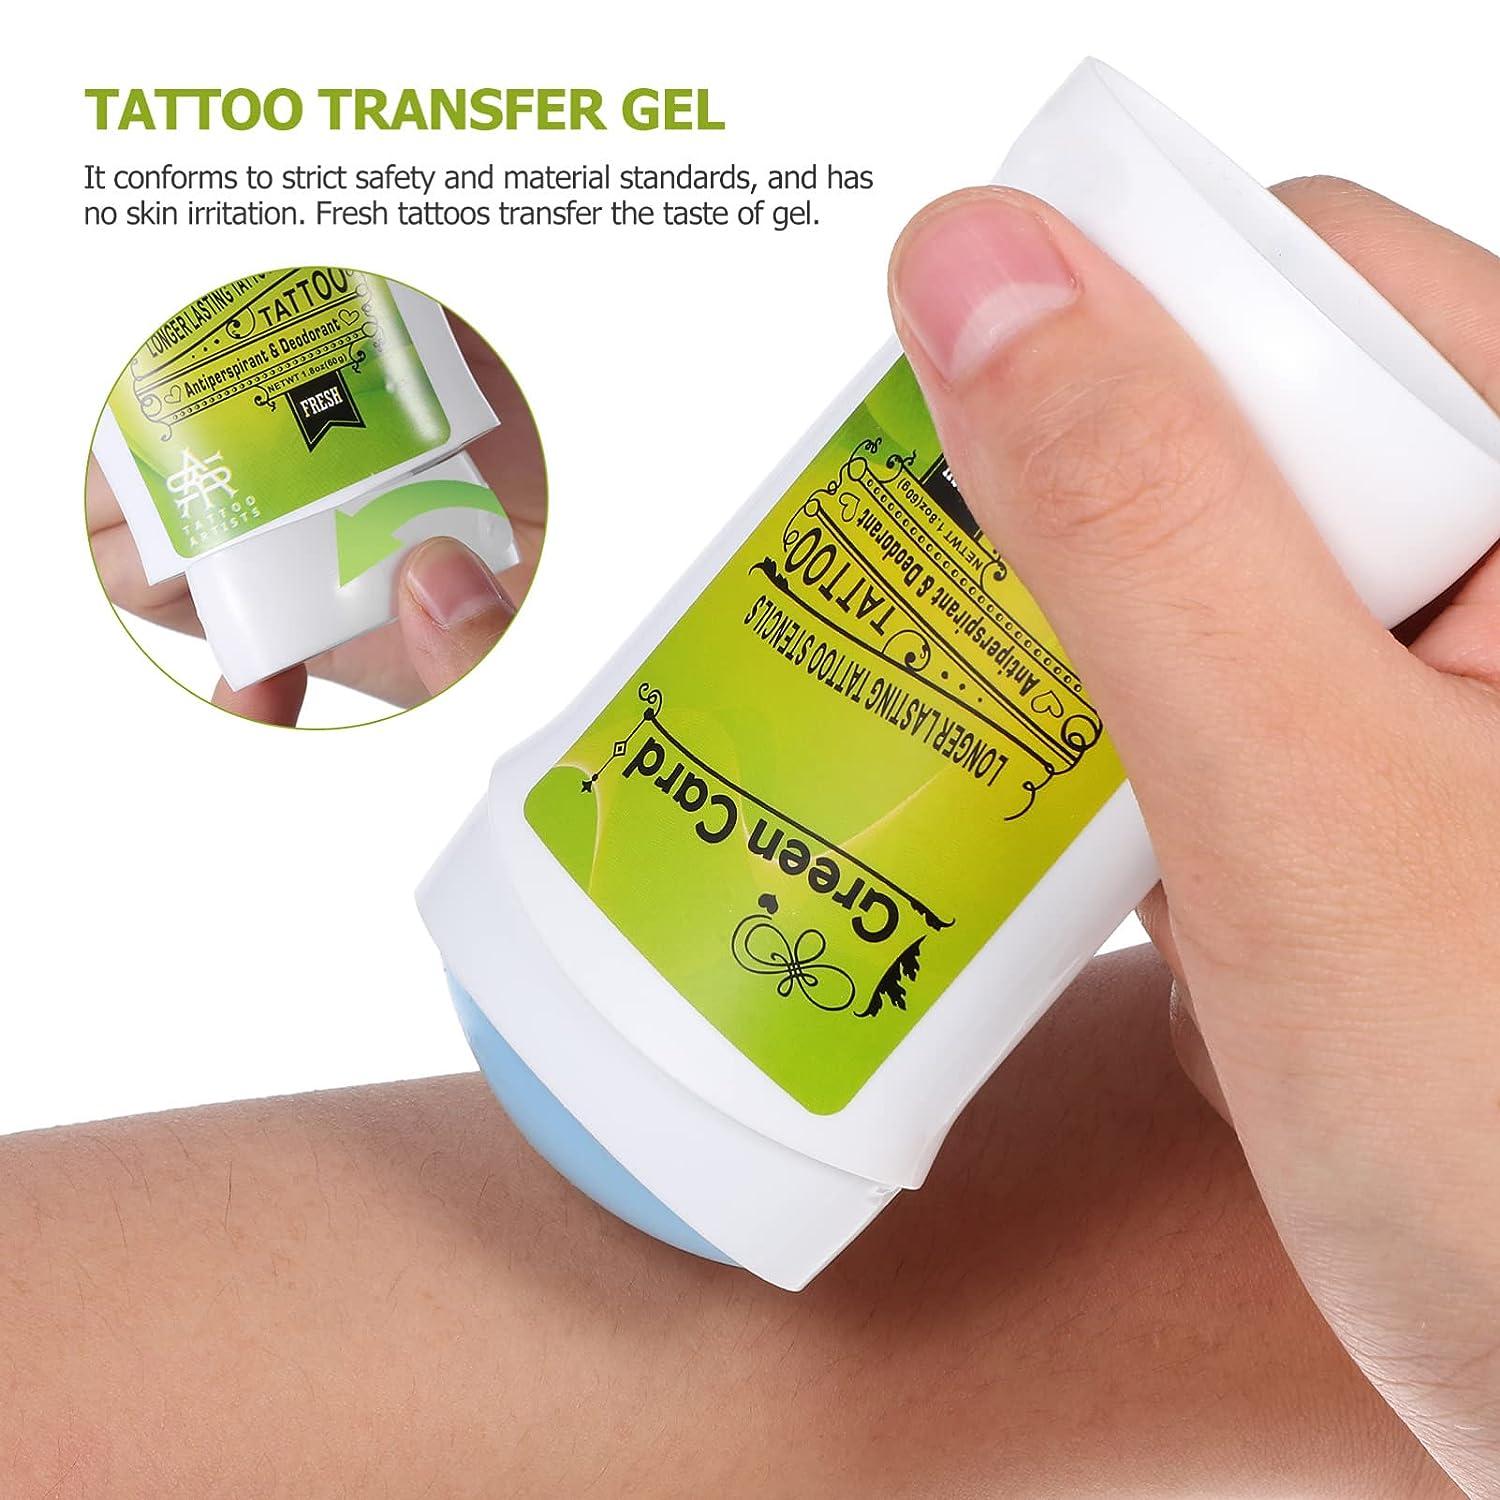 Healeved Tattoo Transfer Paper and Gel 1 Set Tattoo Transfer Cream Gel+50  Tattoo Transfer Paper Tattoo Skin Solution Soap Tattoo Transfer Soap  Stencil Temporary Tattoo Supplies